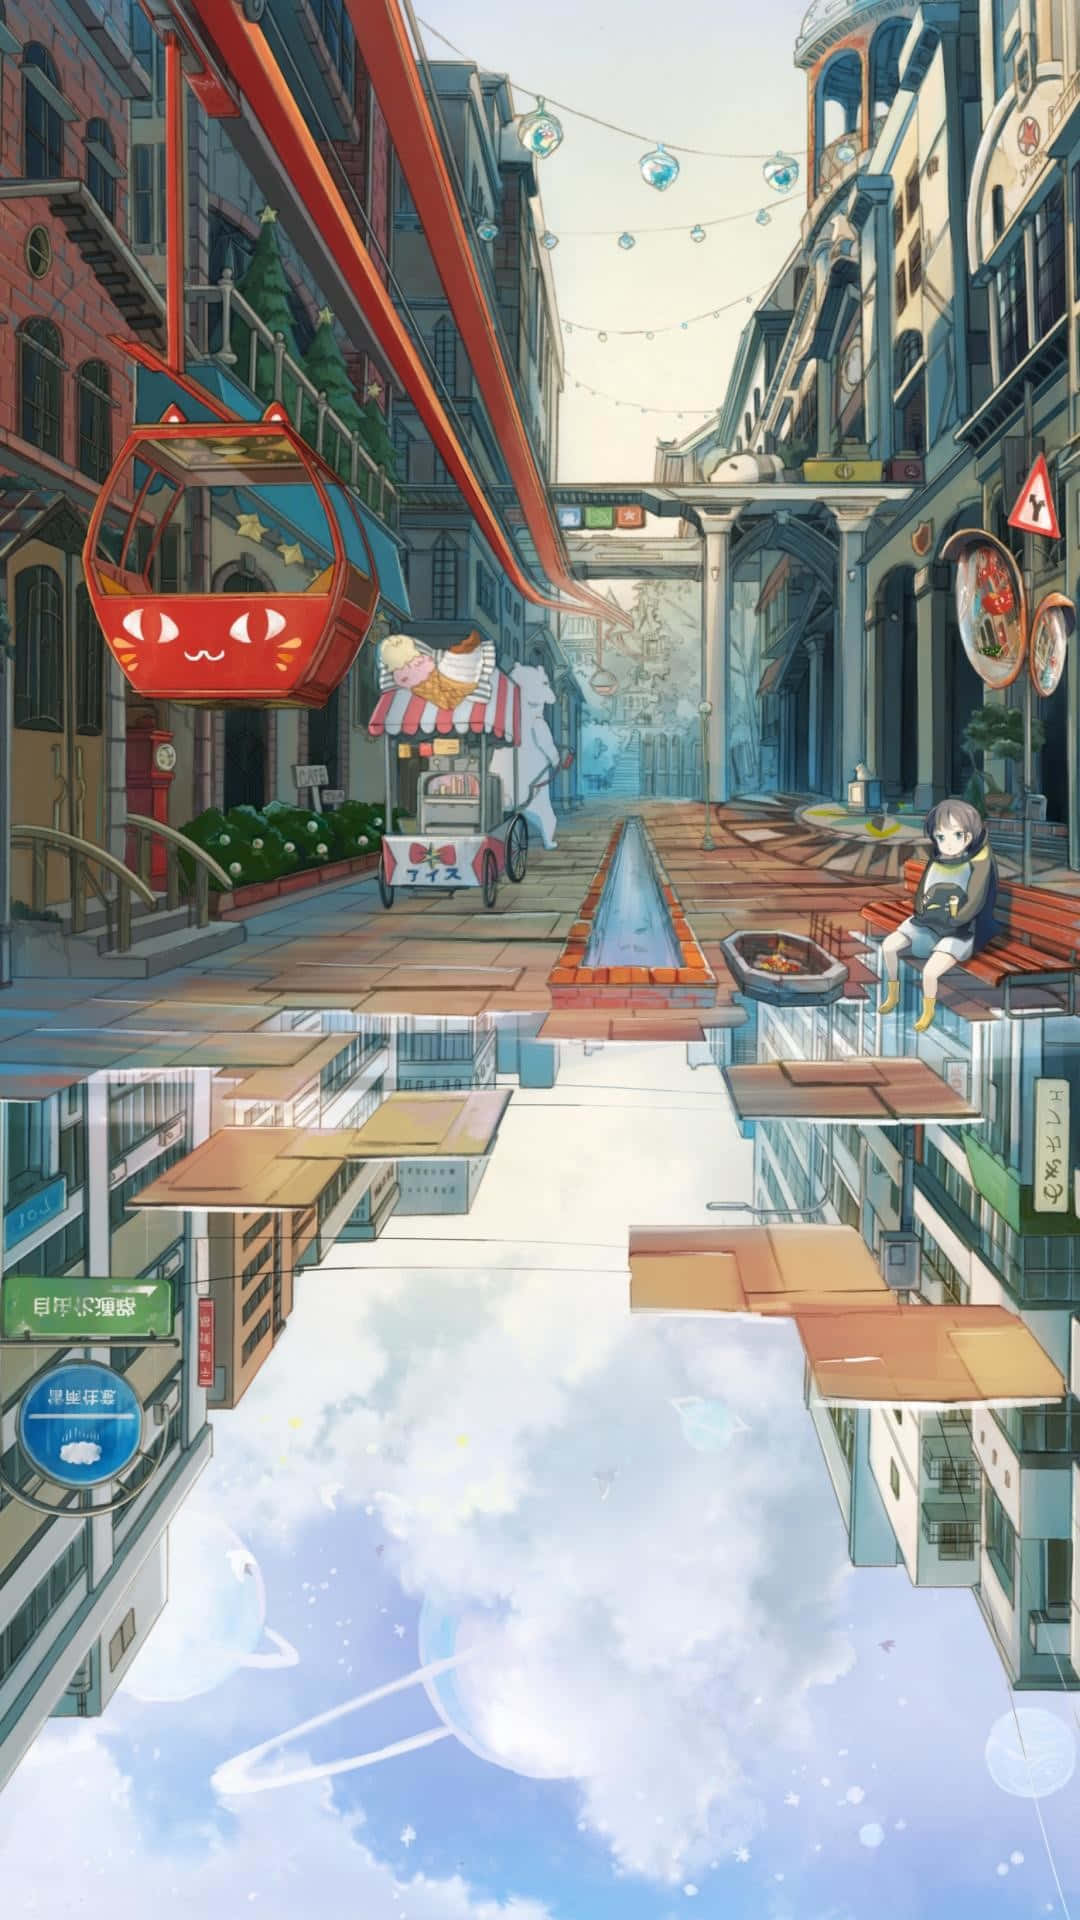 Nighttime Wonders In A Vibrant Anime City